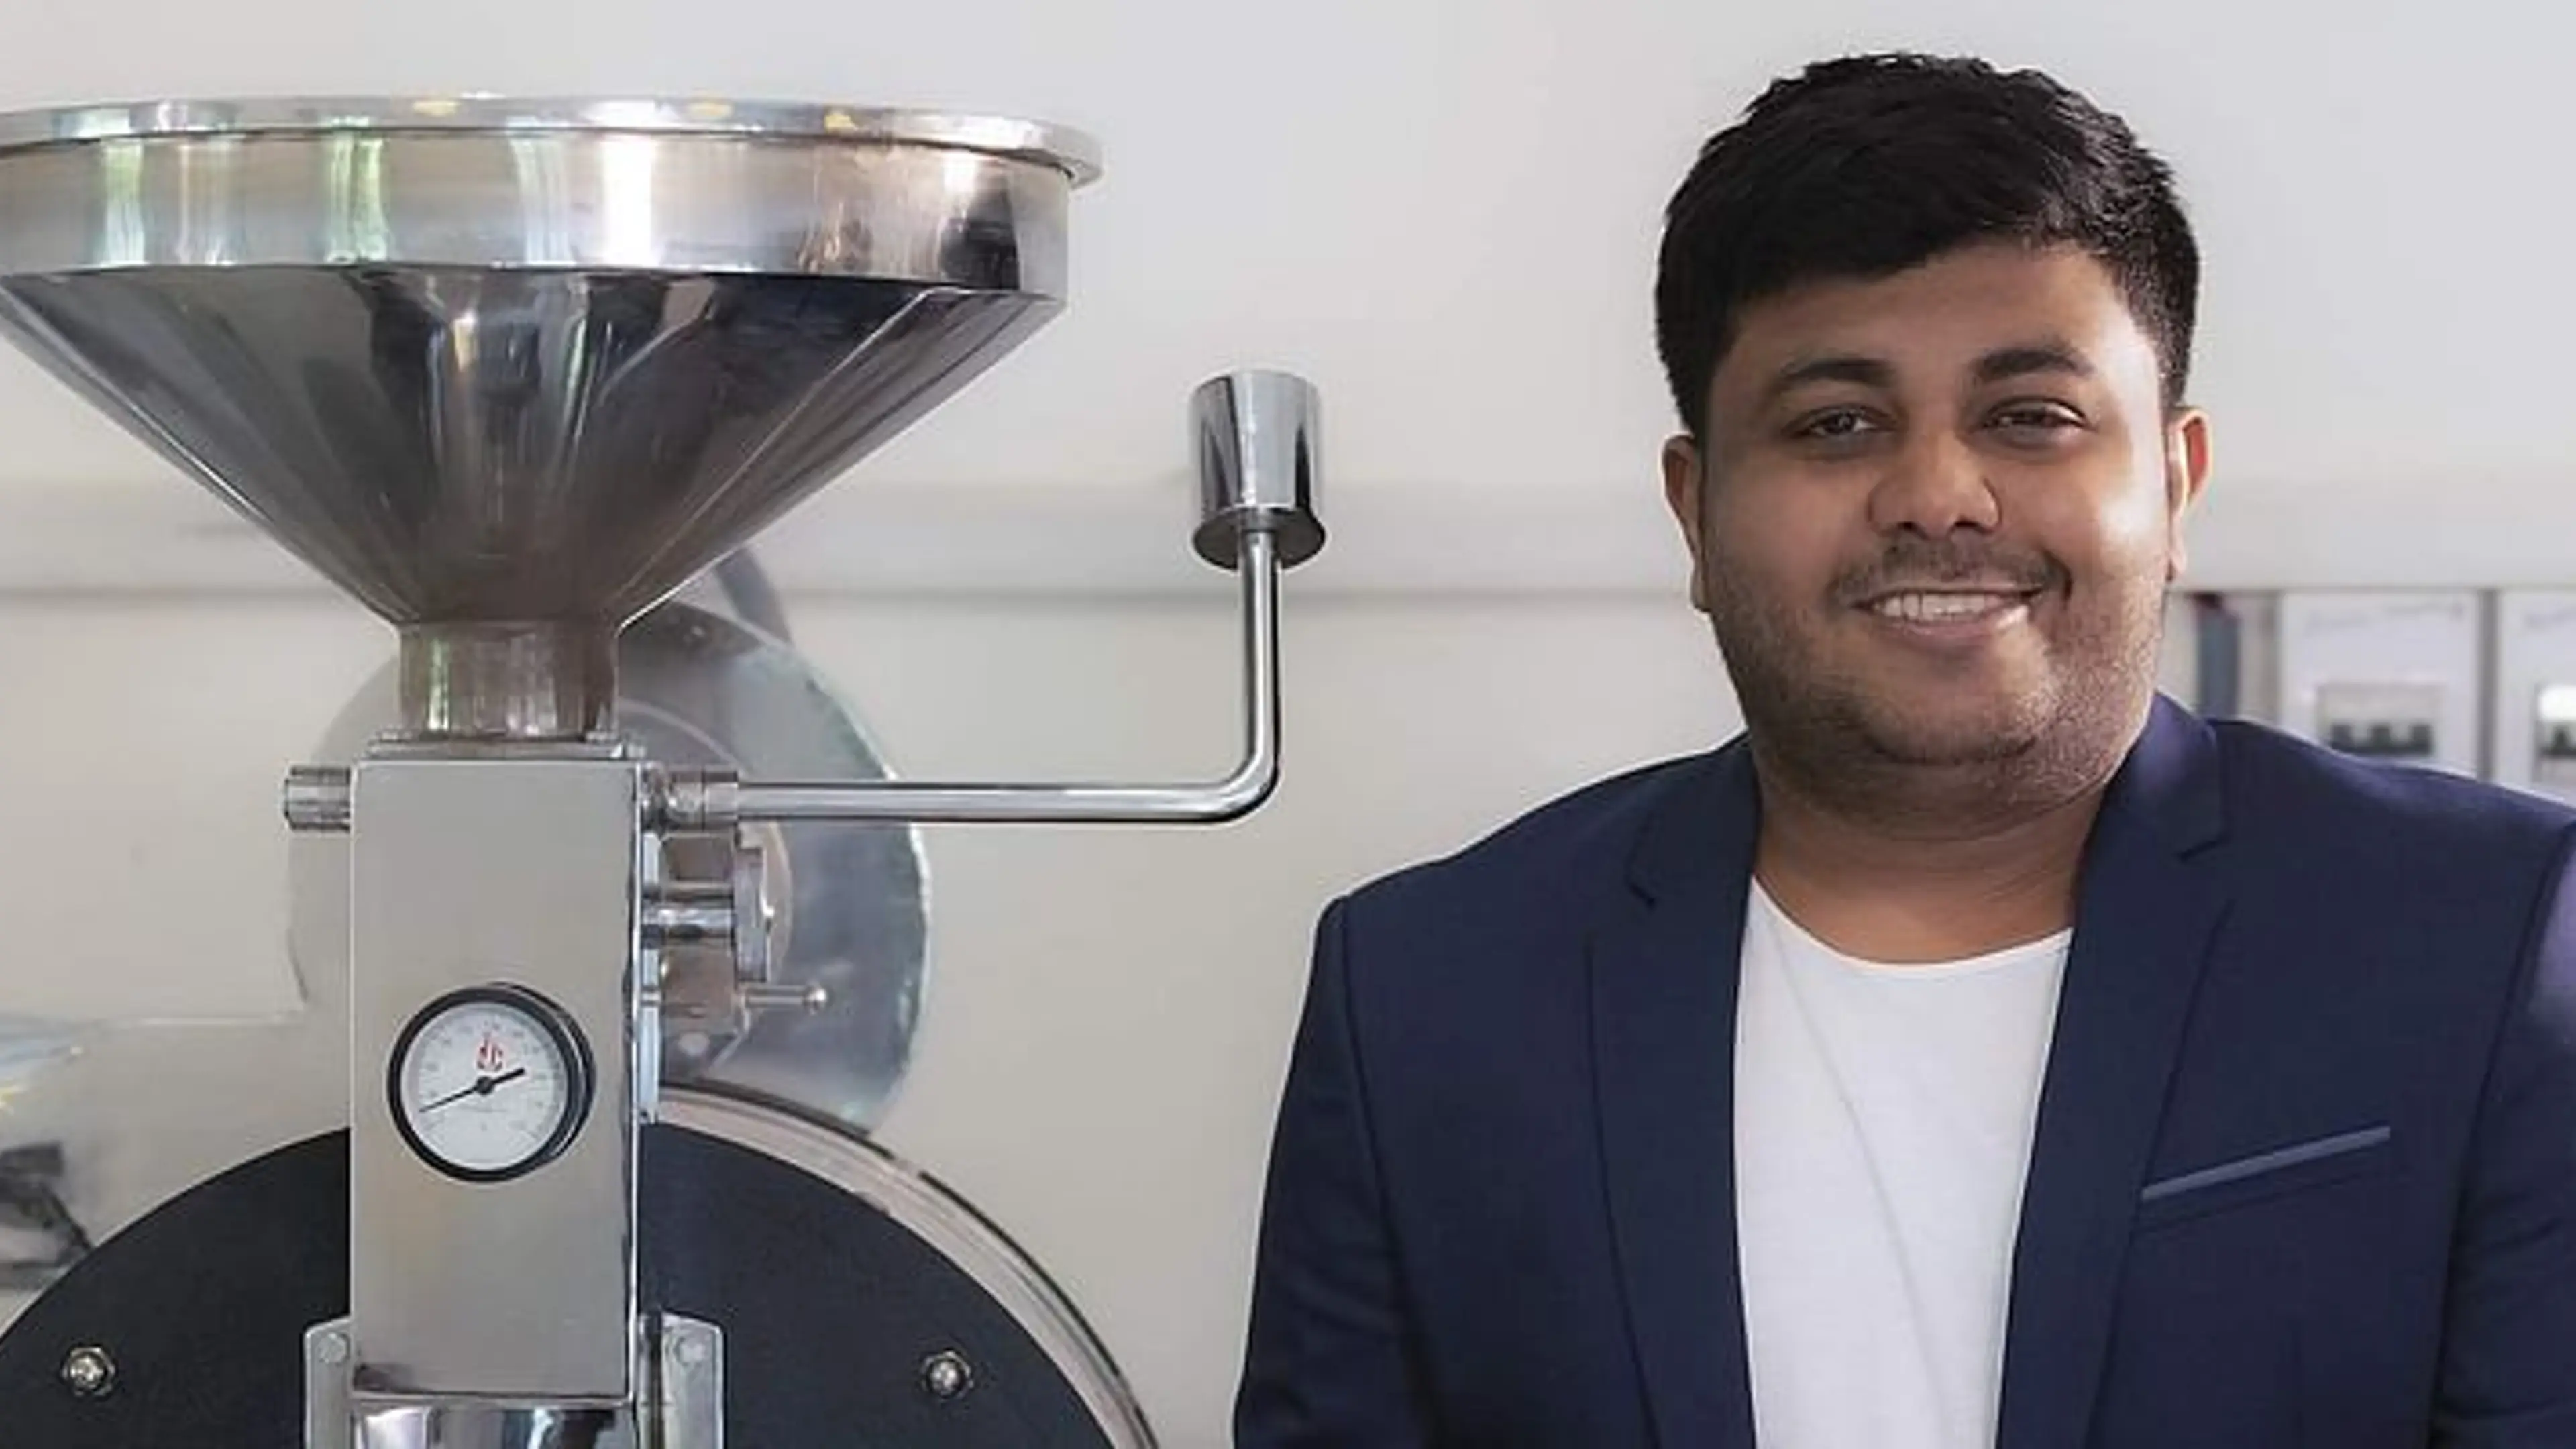 Joining the coffee industry on his teacher’s advice, this 35-yr-old entrepreneur’s business now clocks Rs 8 Cr annually